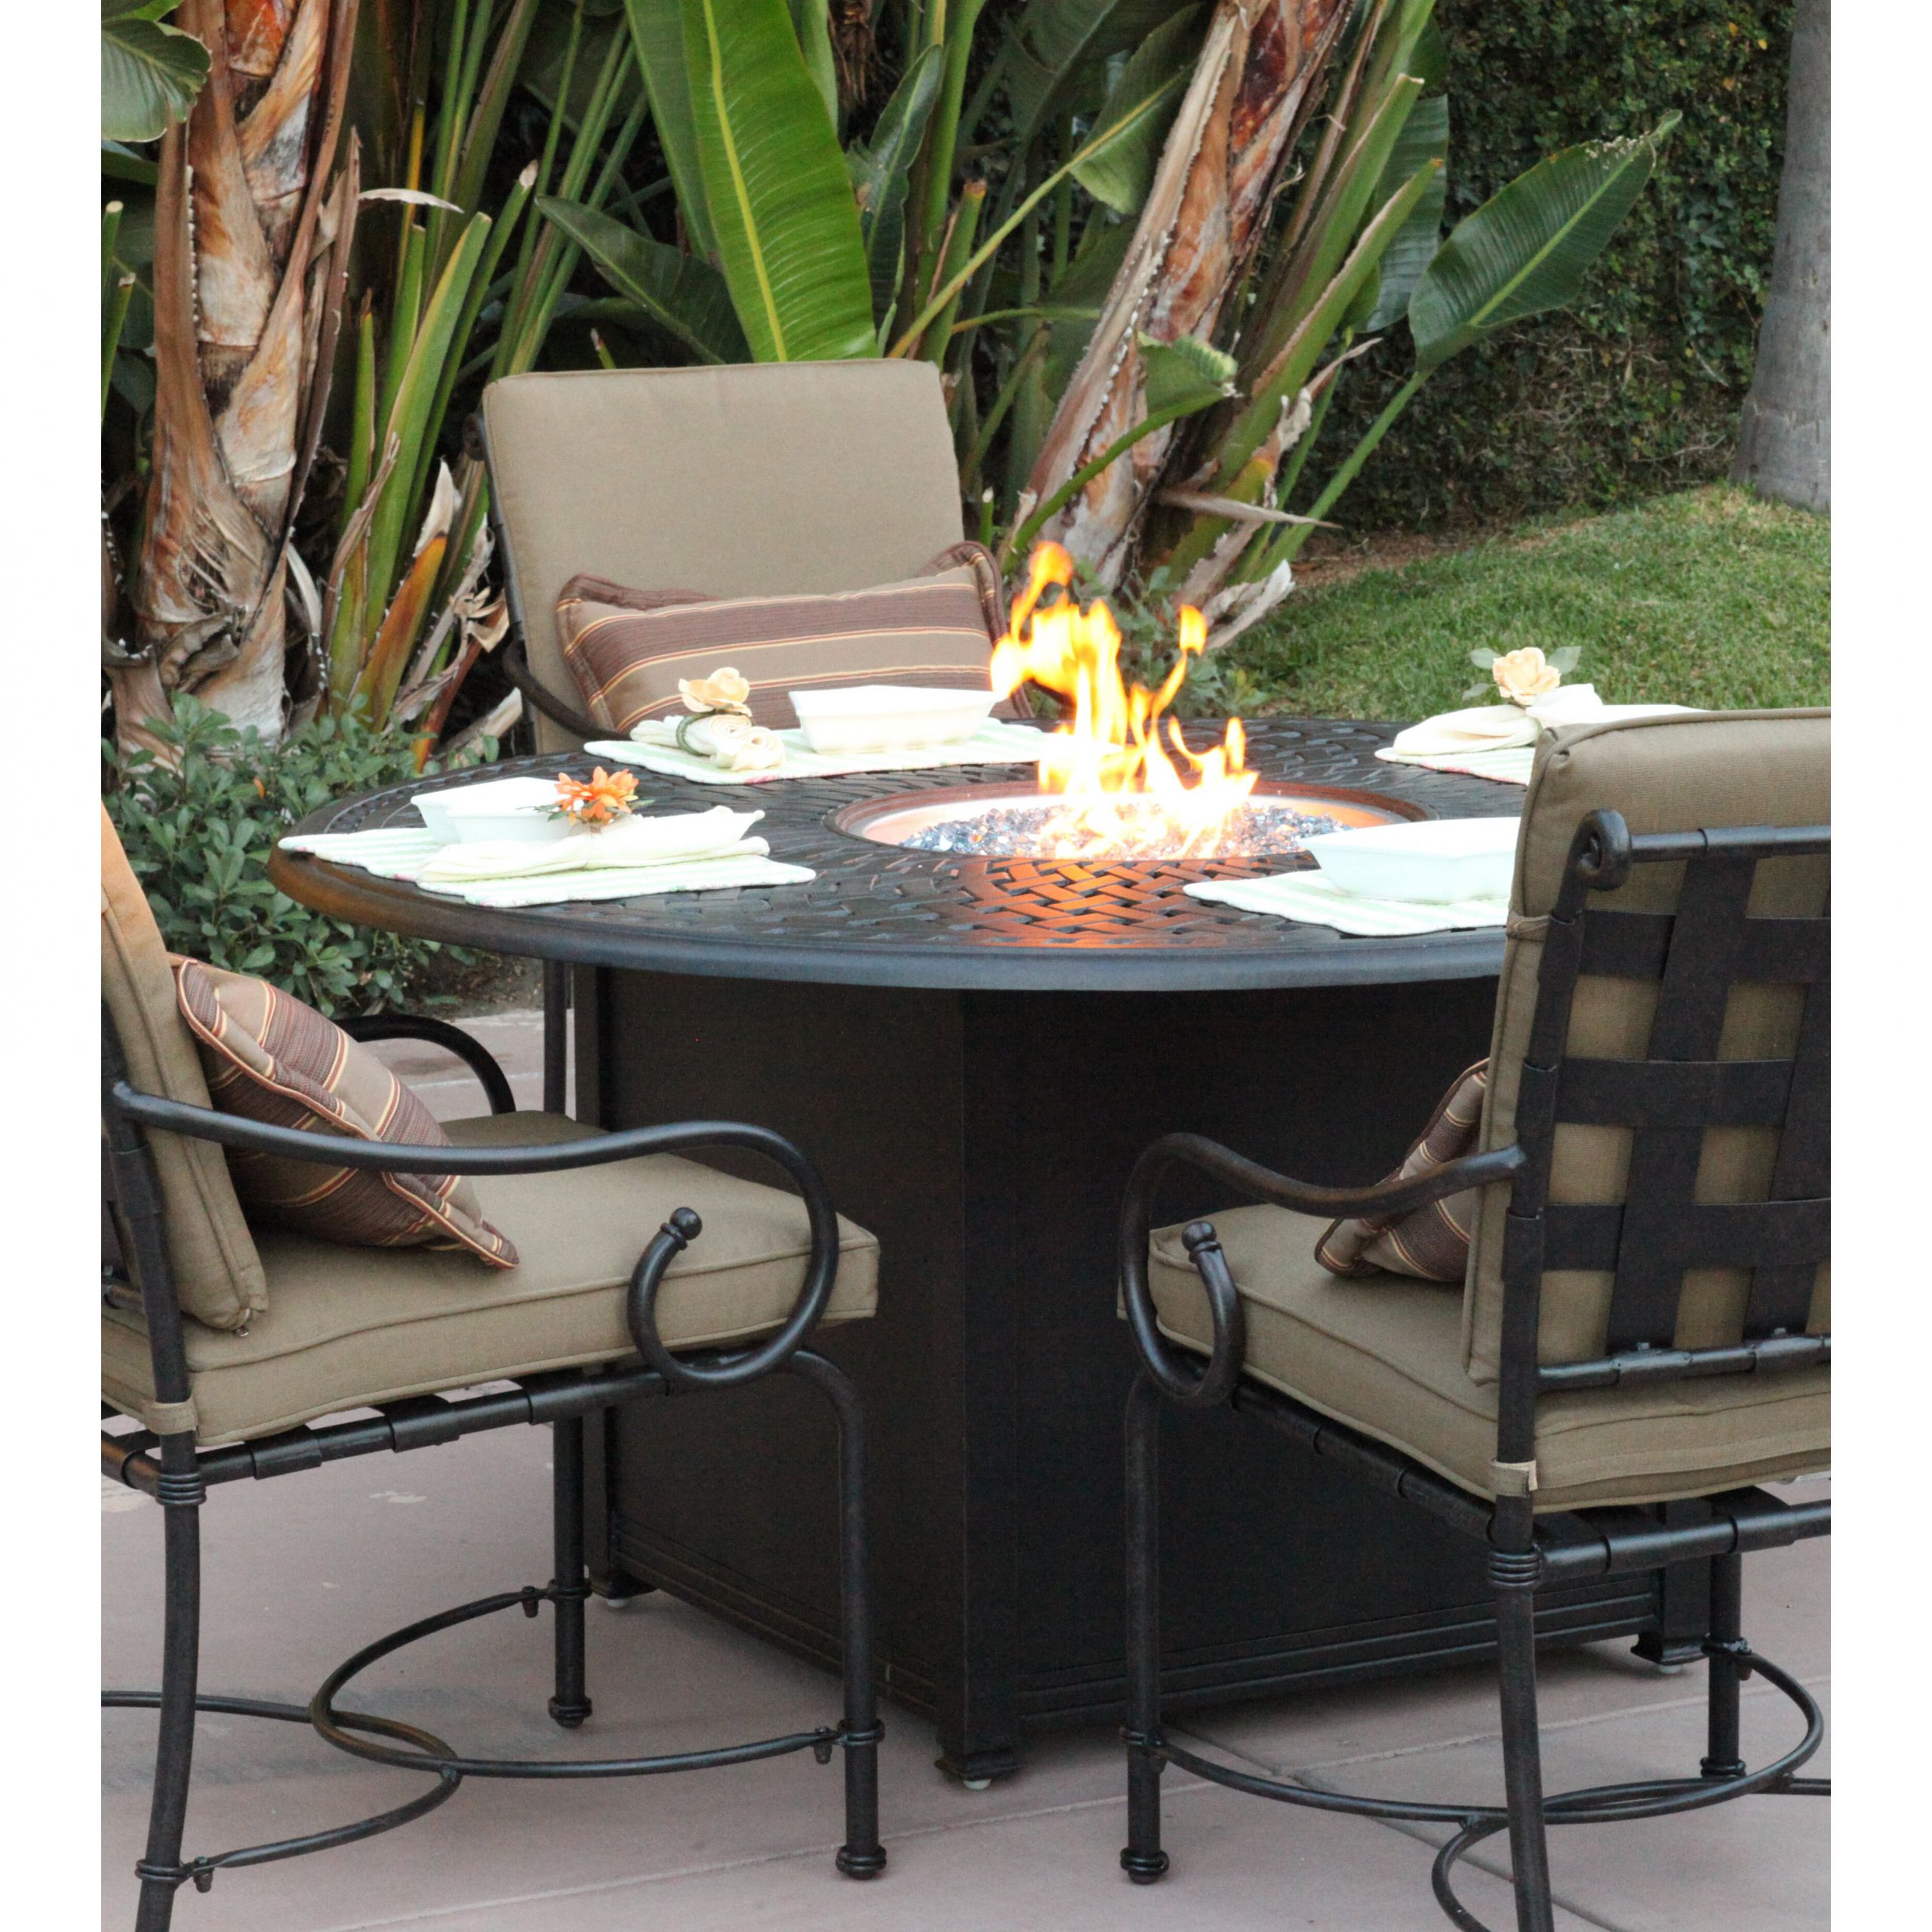 Firepit Patio Table
 Darlee Series 60 Fire Pit Table & Reviews